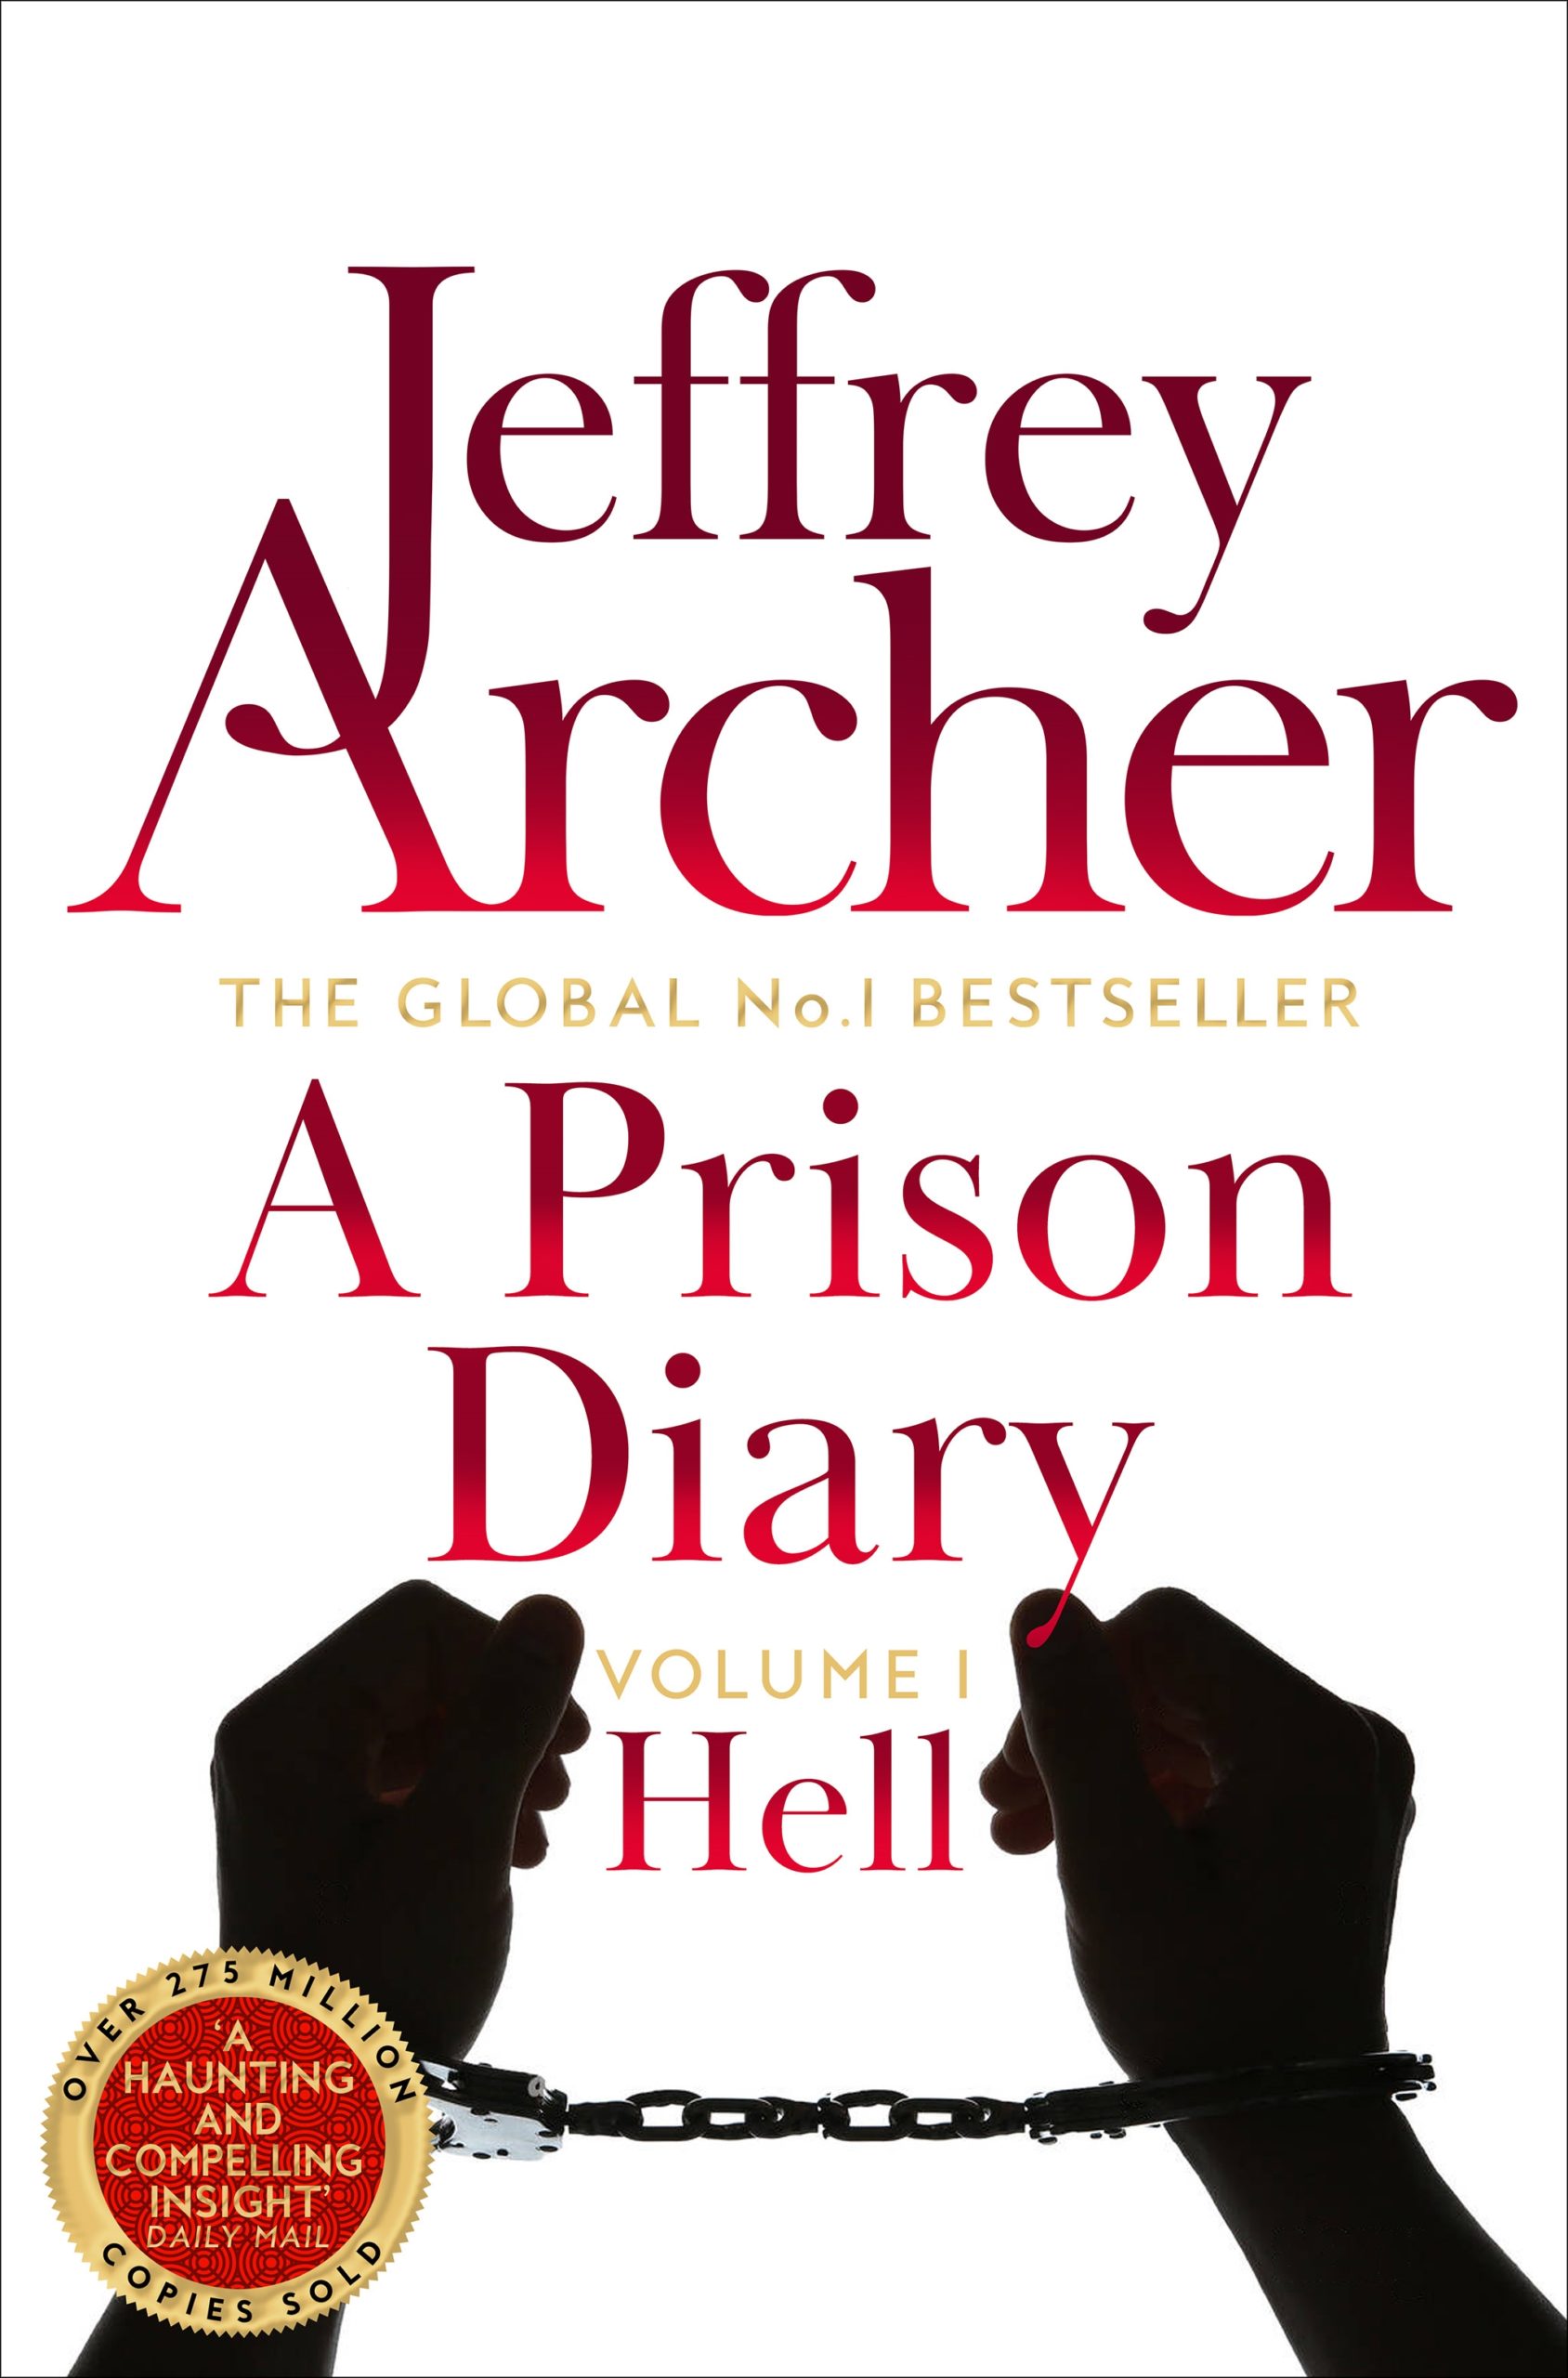 Hell. A Prison Diary by Jeffrey Archer. Part 1 of The Prison Diary Series